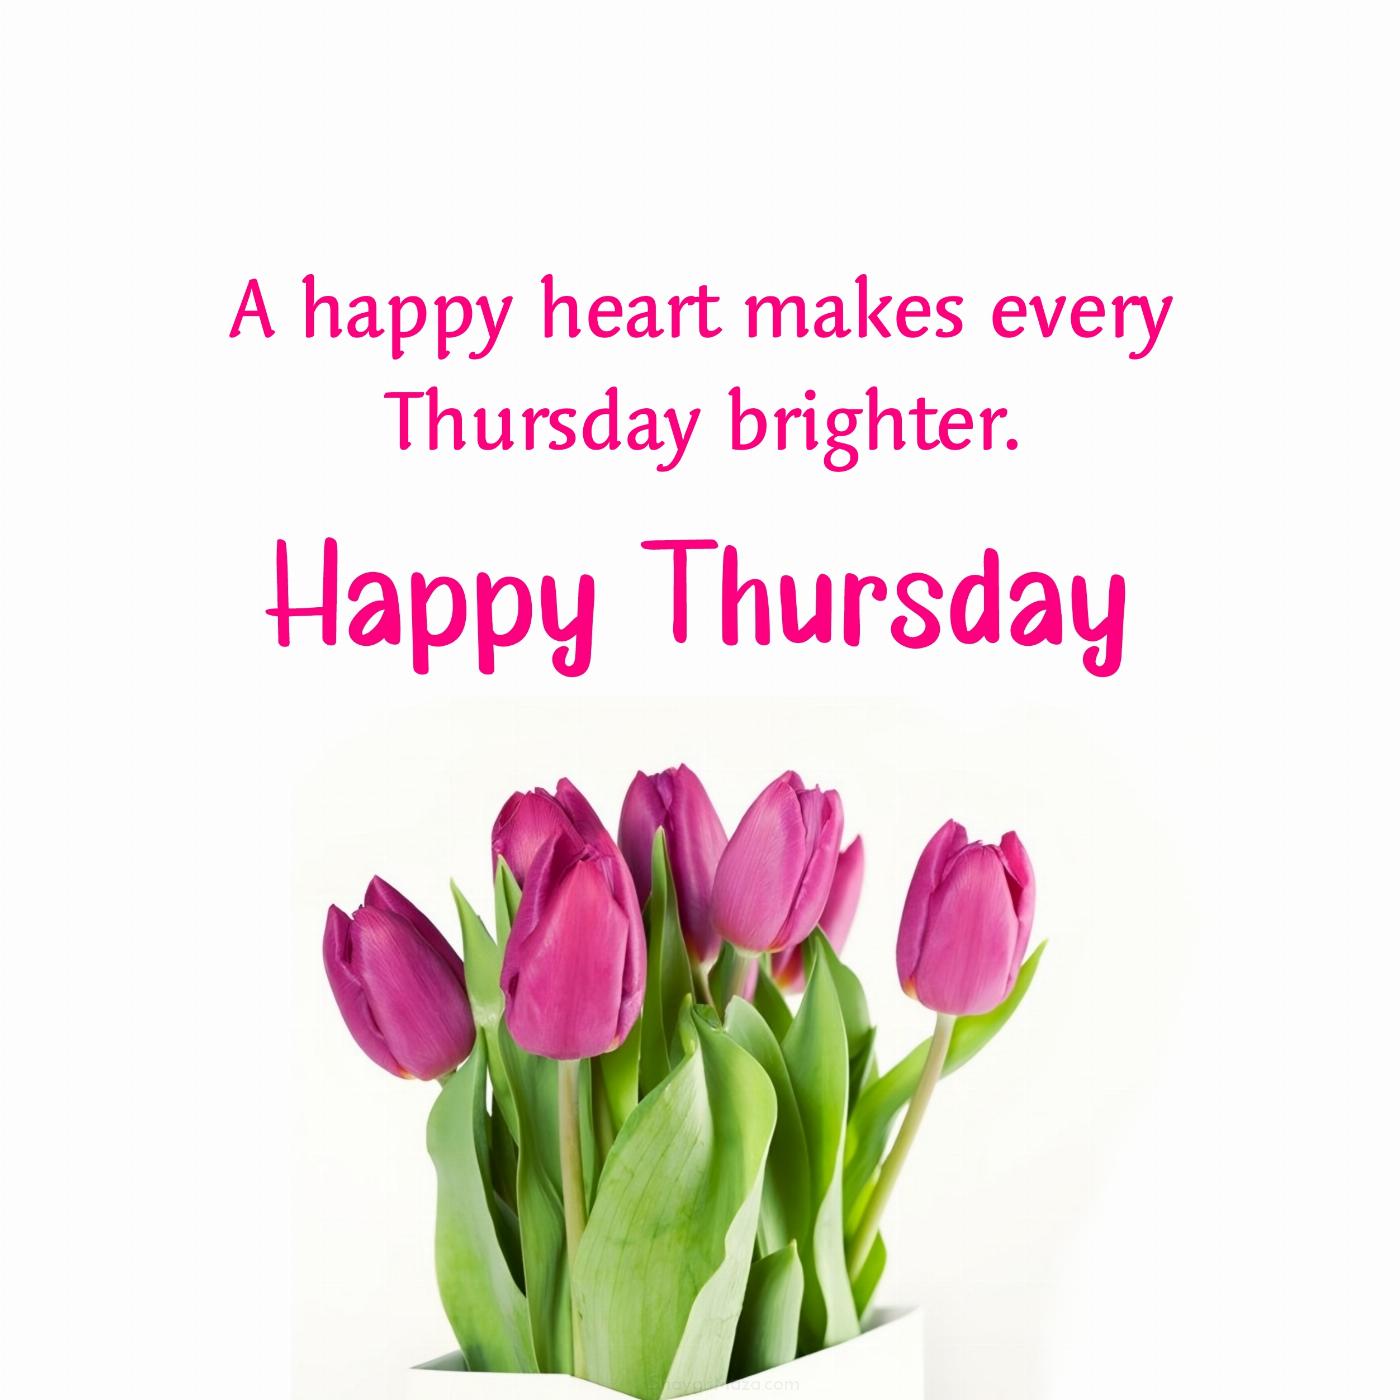 A happy heart makes every Thursday brighter